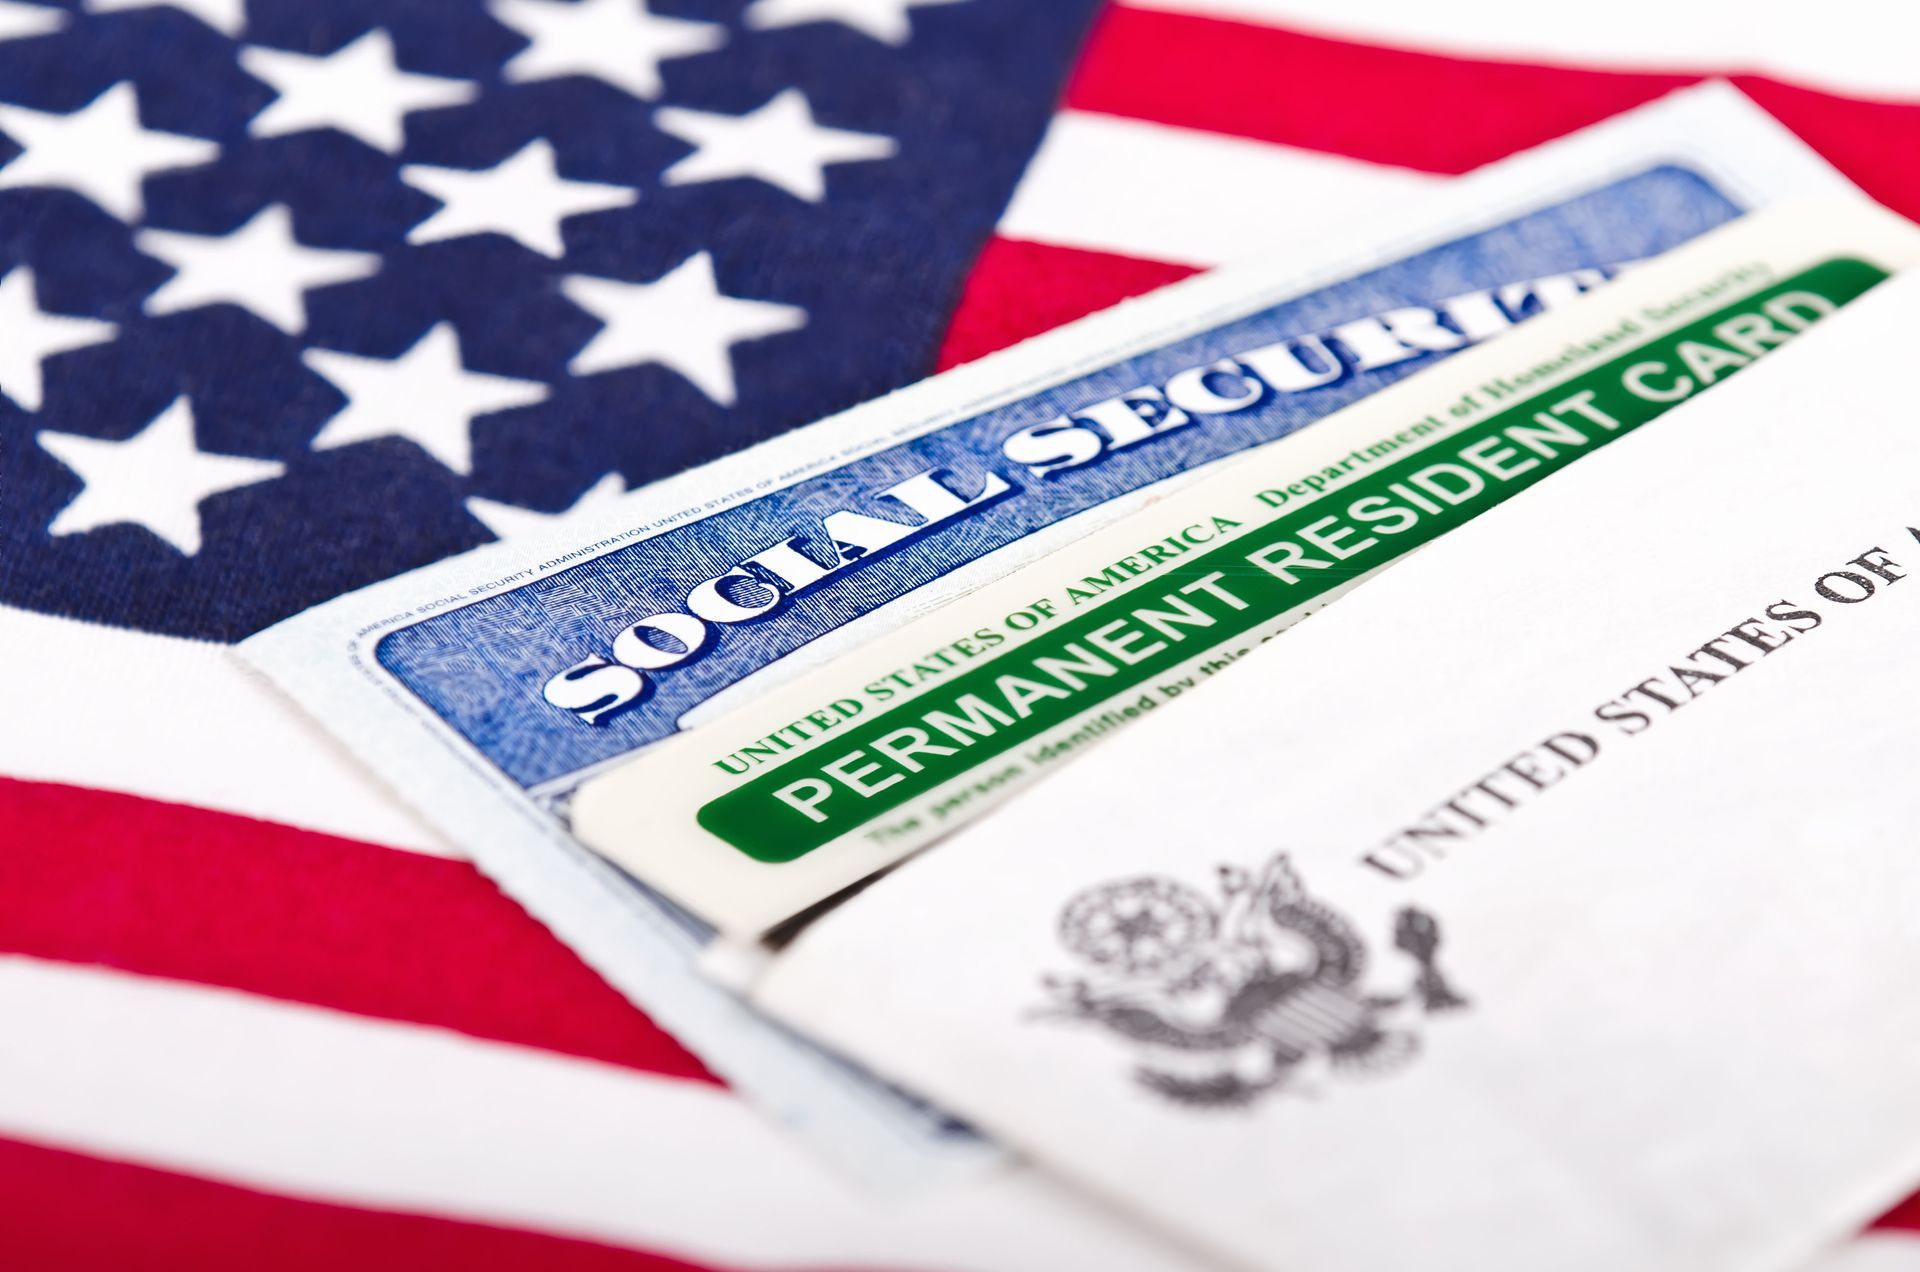 A social security card and a permanent resident card on top of an American flag